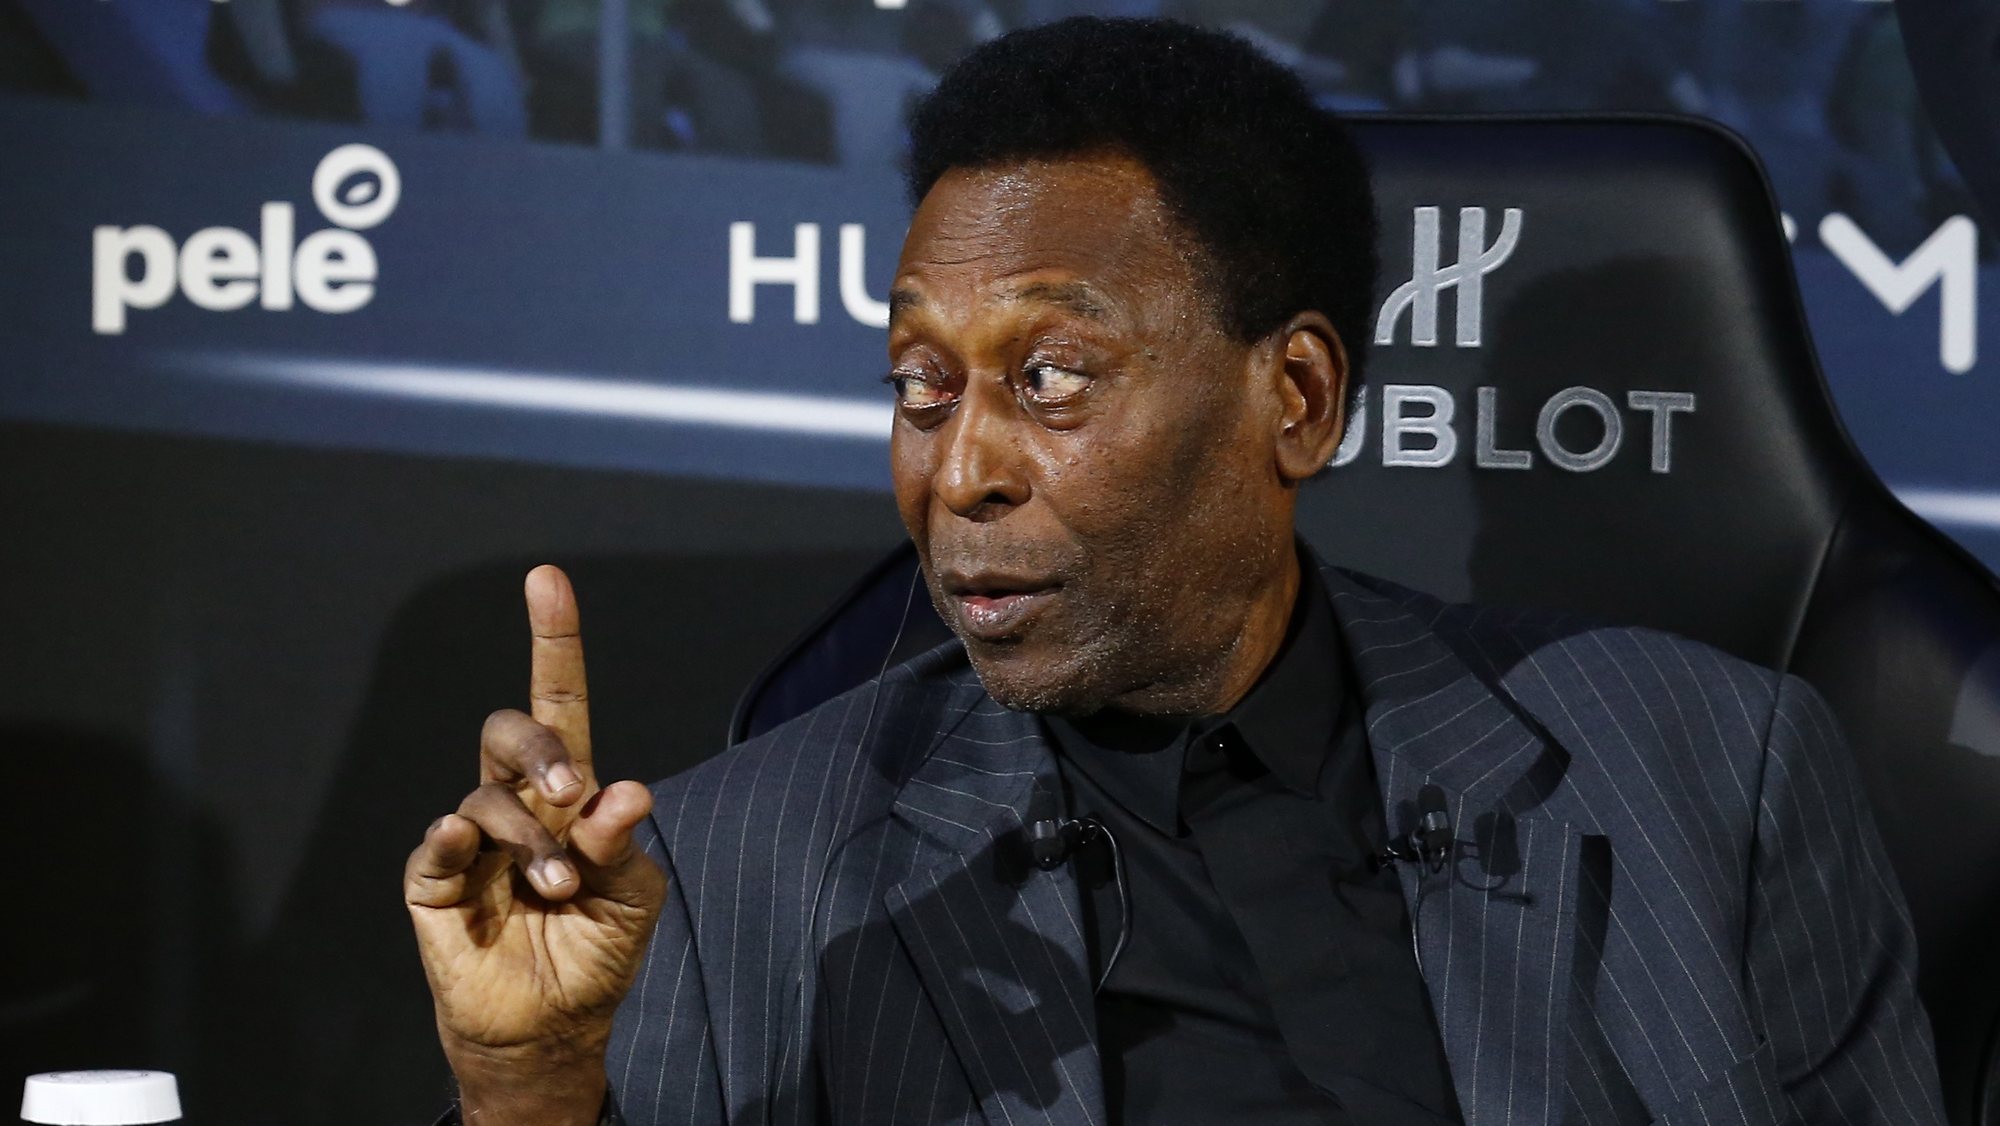 epa08767362 (FILE) - Legendary Brazilian former soccer player Pele attends a press conference at a commercial event in Paris, France, 02 April 2019 (re-issued on 23 October 2020). Edson Arantes do Nascimento &#039;Pele&#039; was born in Tres Coracoes, Minas Gerais, Brazil on 23 October 1940 and celebrates today his 80th birthday.  EPA/IAN LANGSDON *** Local Caption *** 55099820